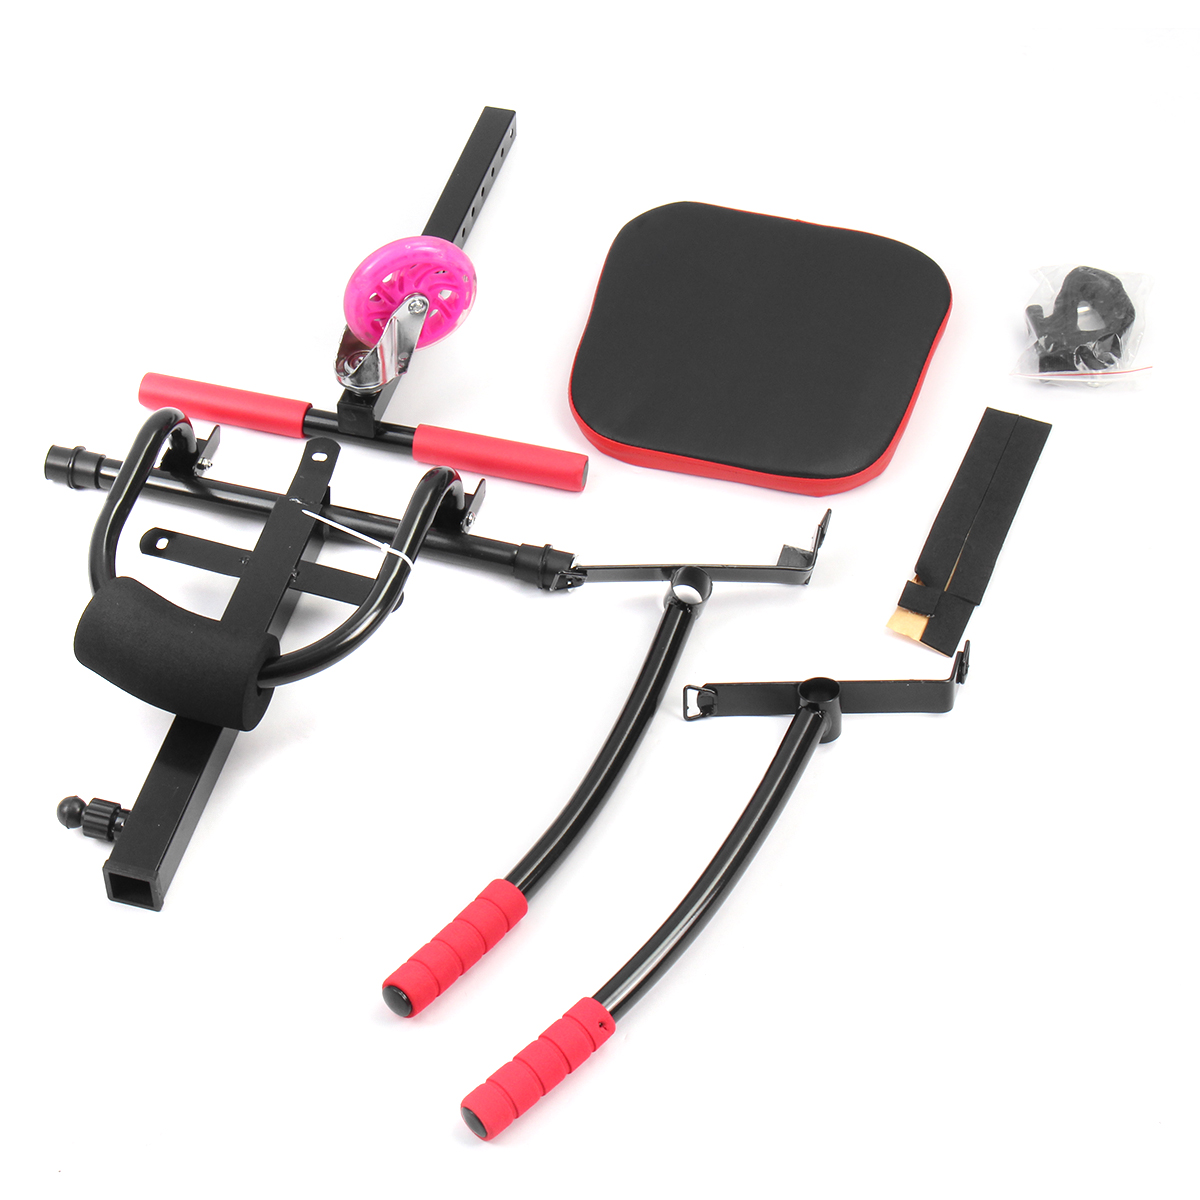 Type A Adjustable Kart Seat Holder Kit For 6.5'' 8''10'' Two Wheel Balance Scooter Red